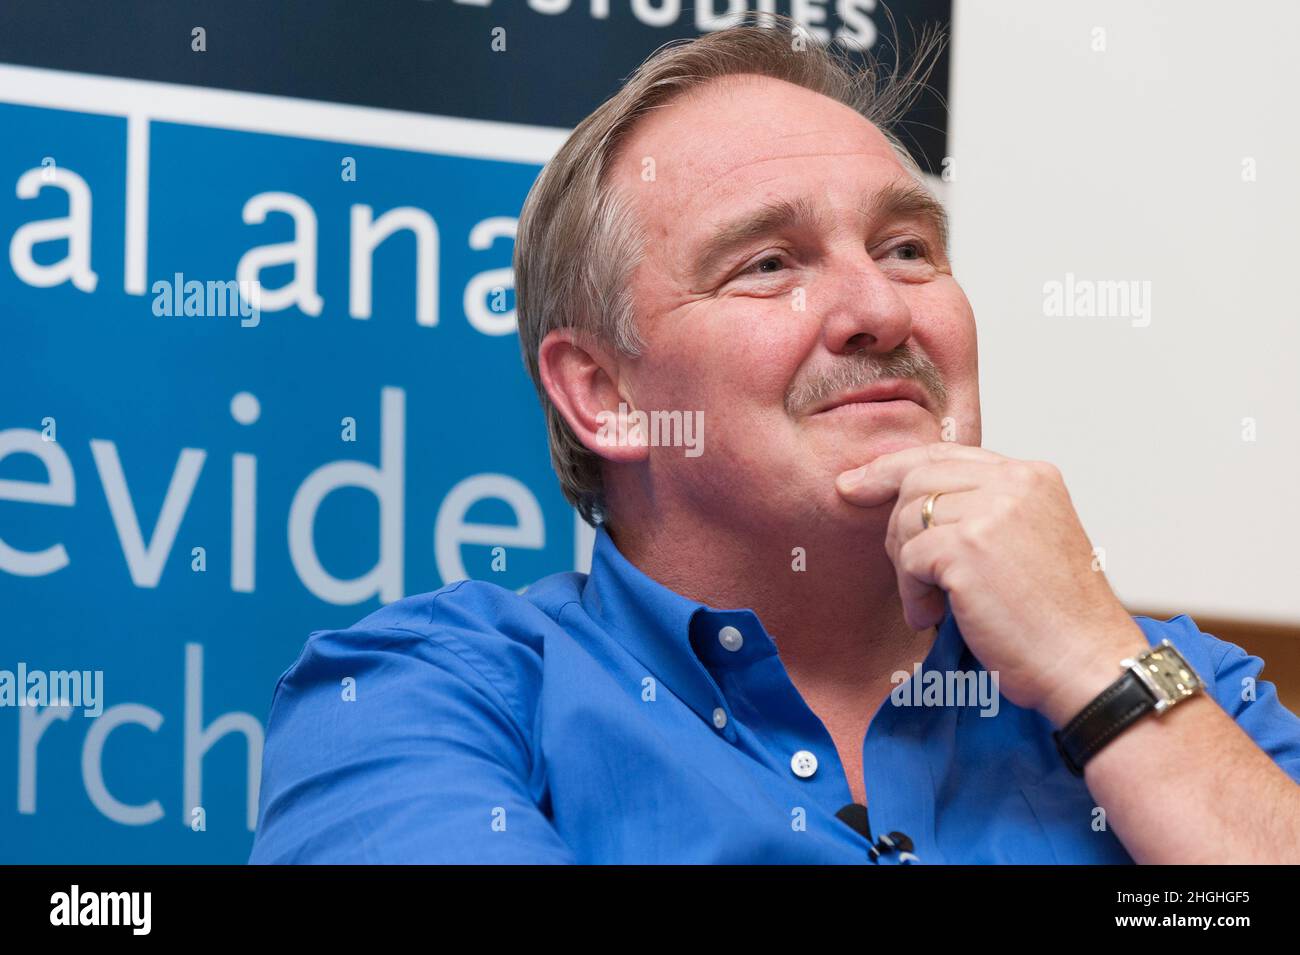 Professor David John Nutt (born 16 April 1951) is an English neuropsychopharmacologist specialising in the research of drugs that affect the brain and Stock Photo